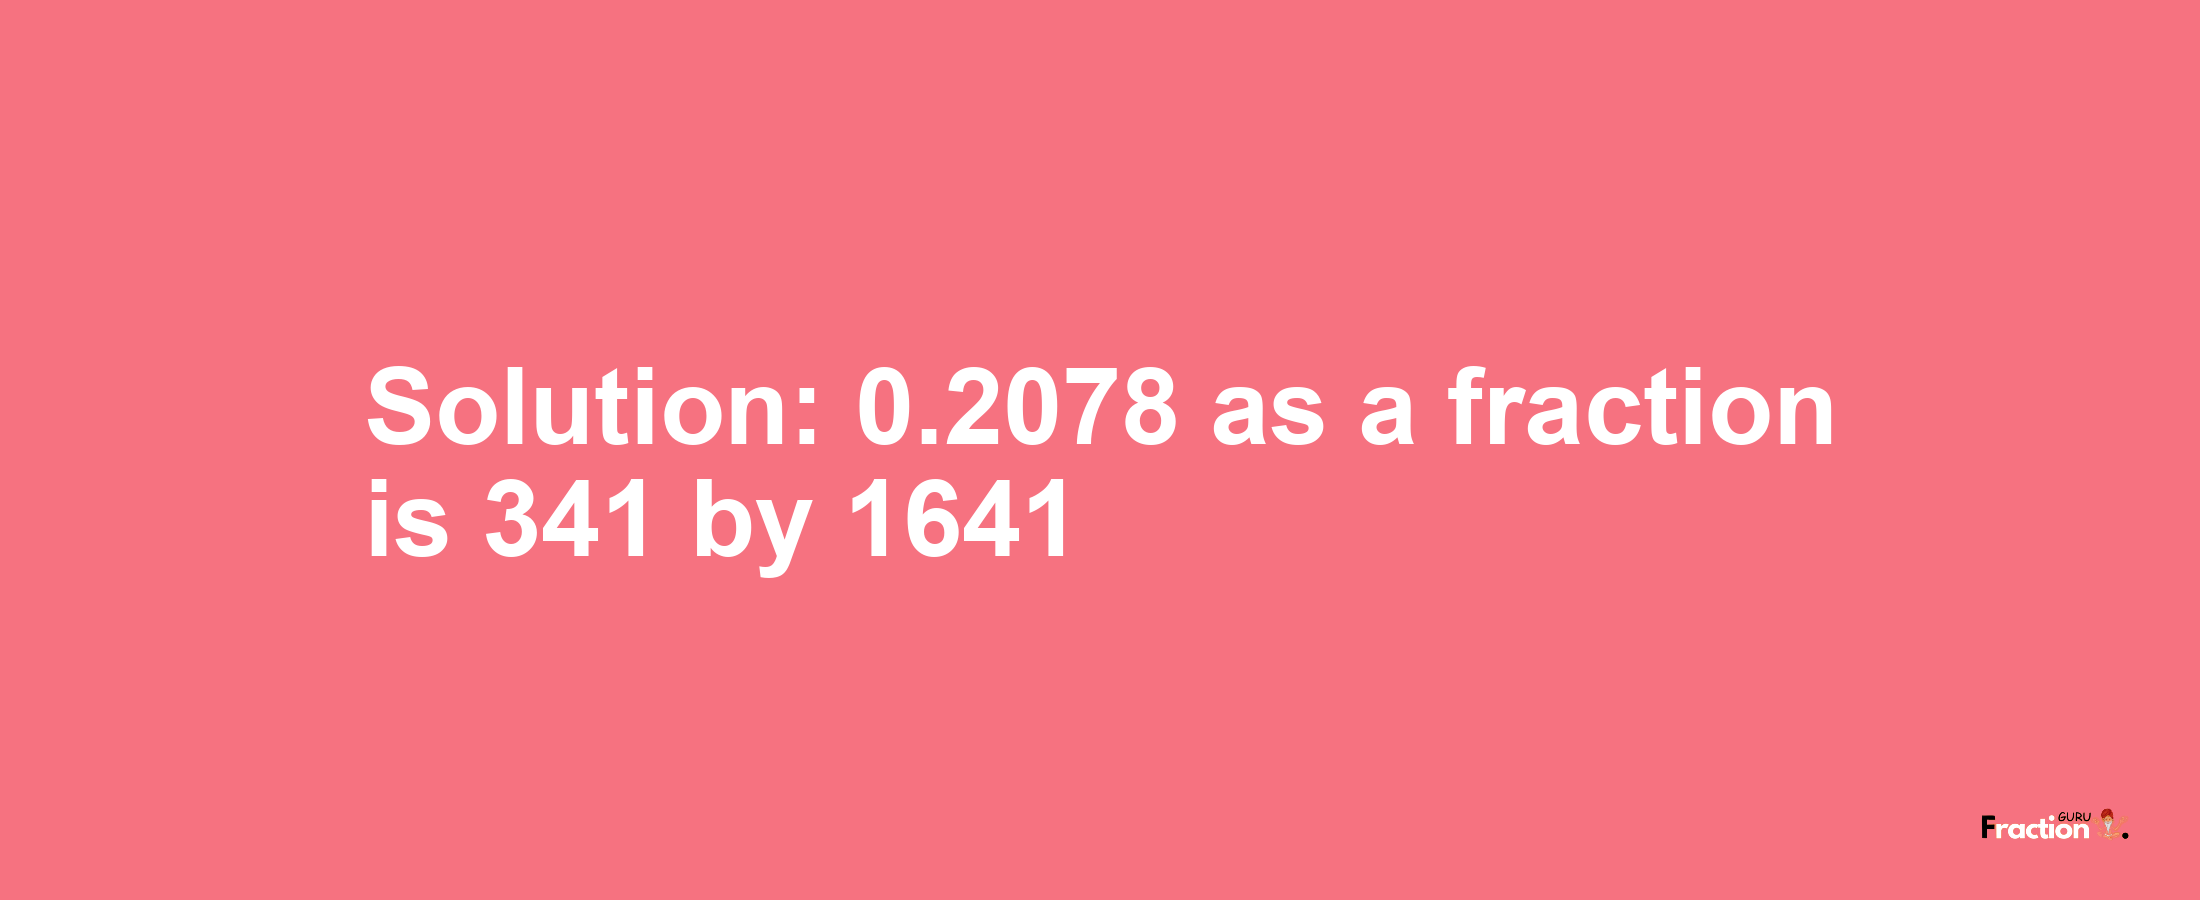 Solution:0.2078 as a fraction is 341/1641